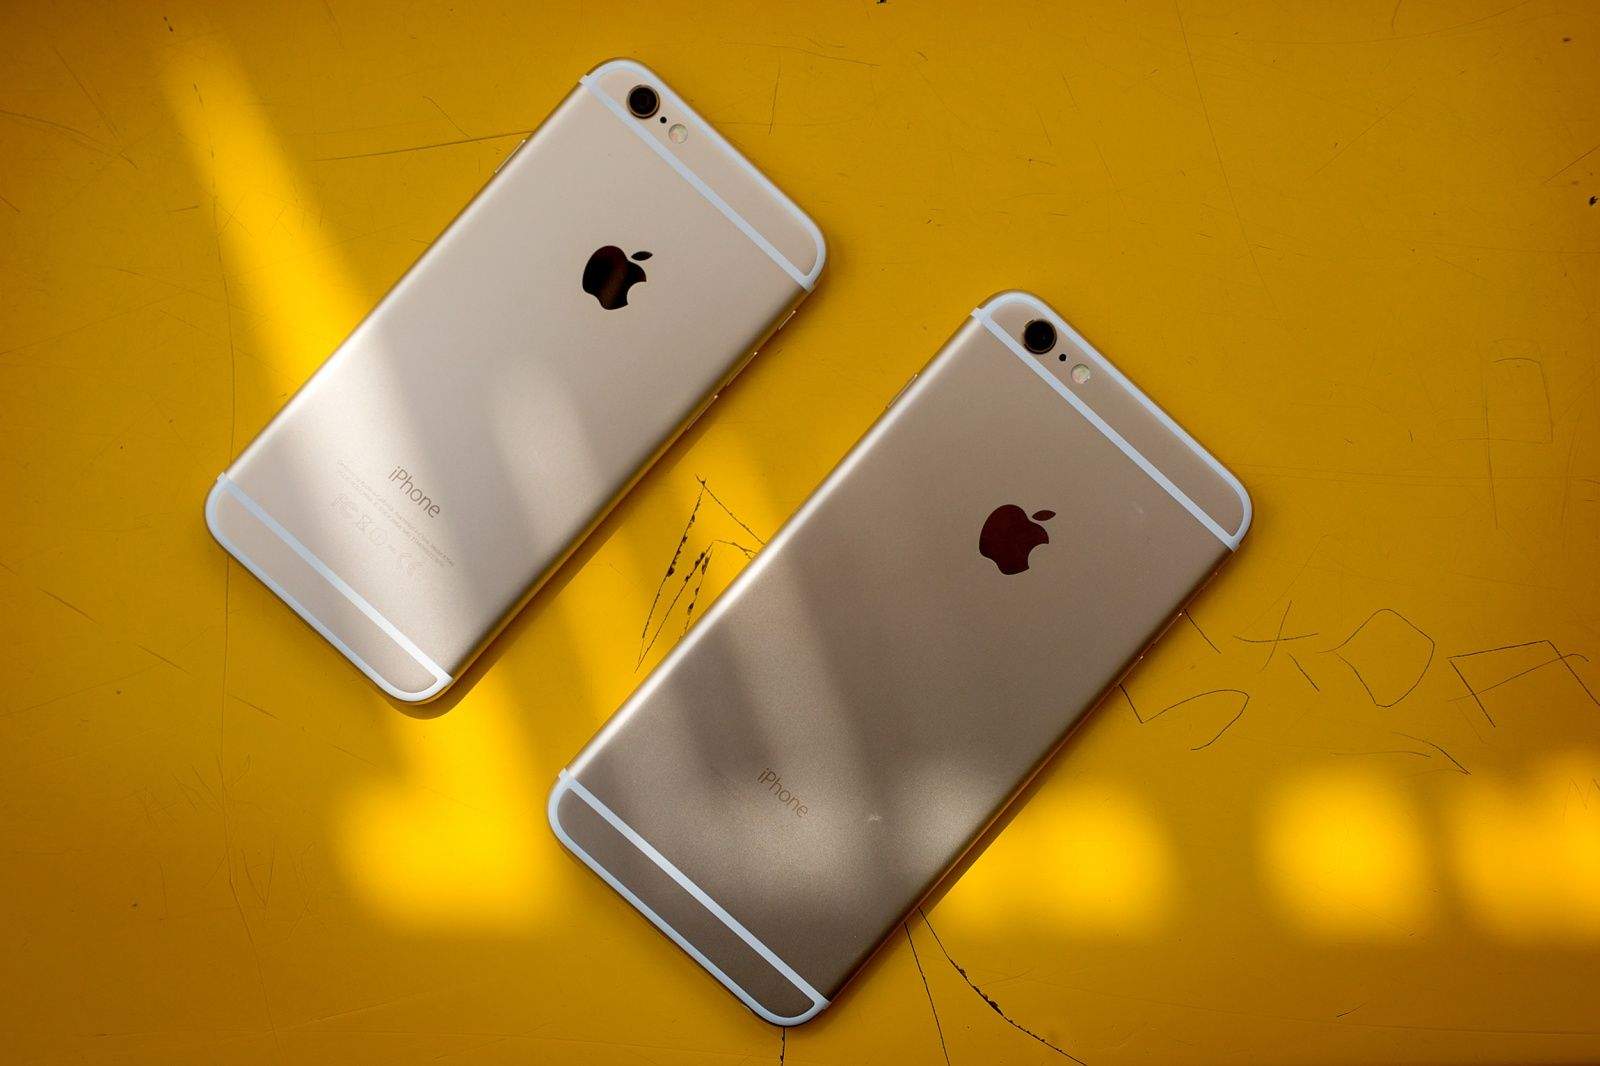 Review: Smaller iPhone 6 proves bigger isn't always better - Page 4 of